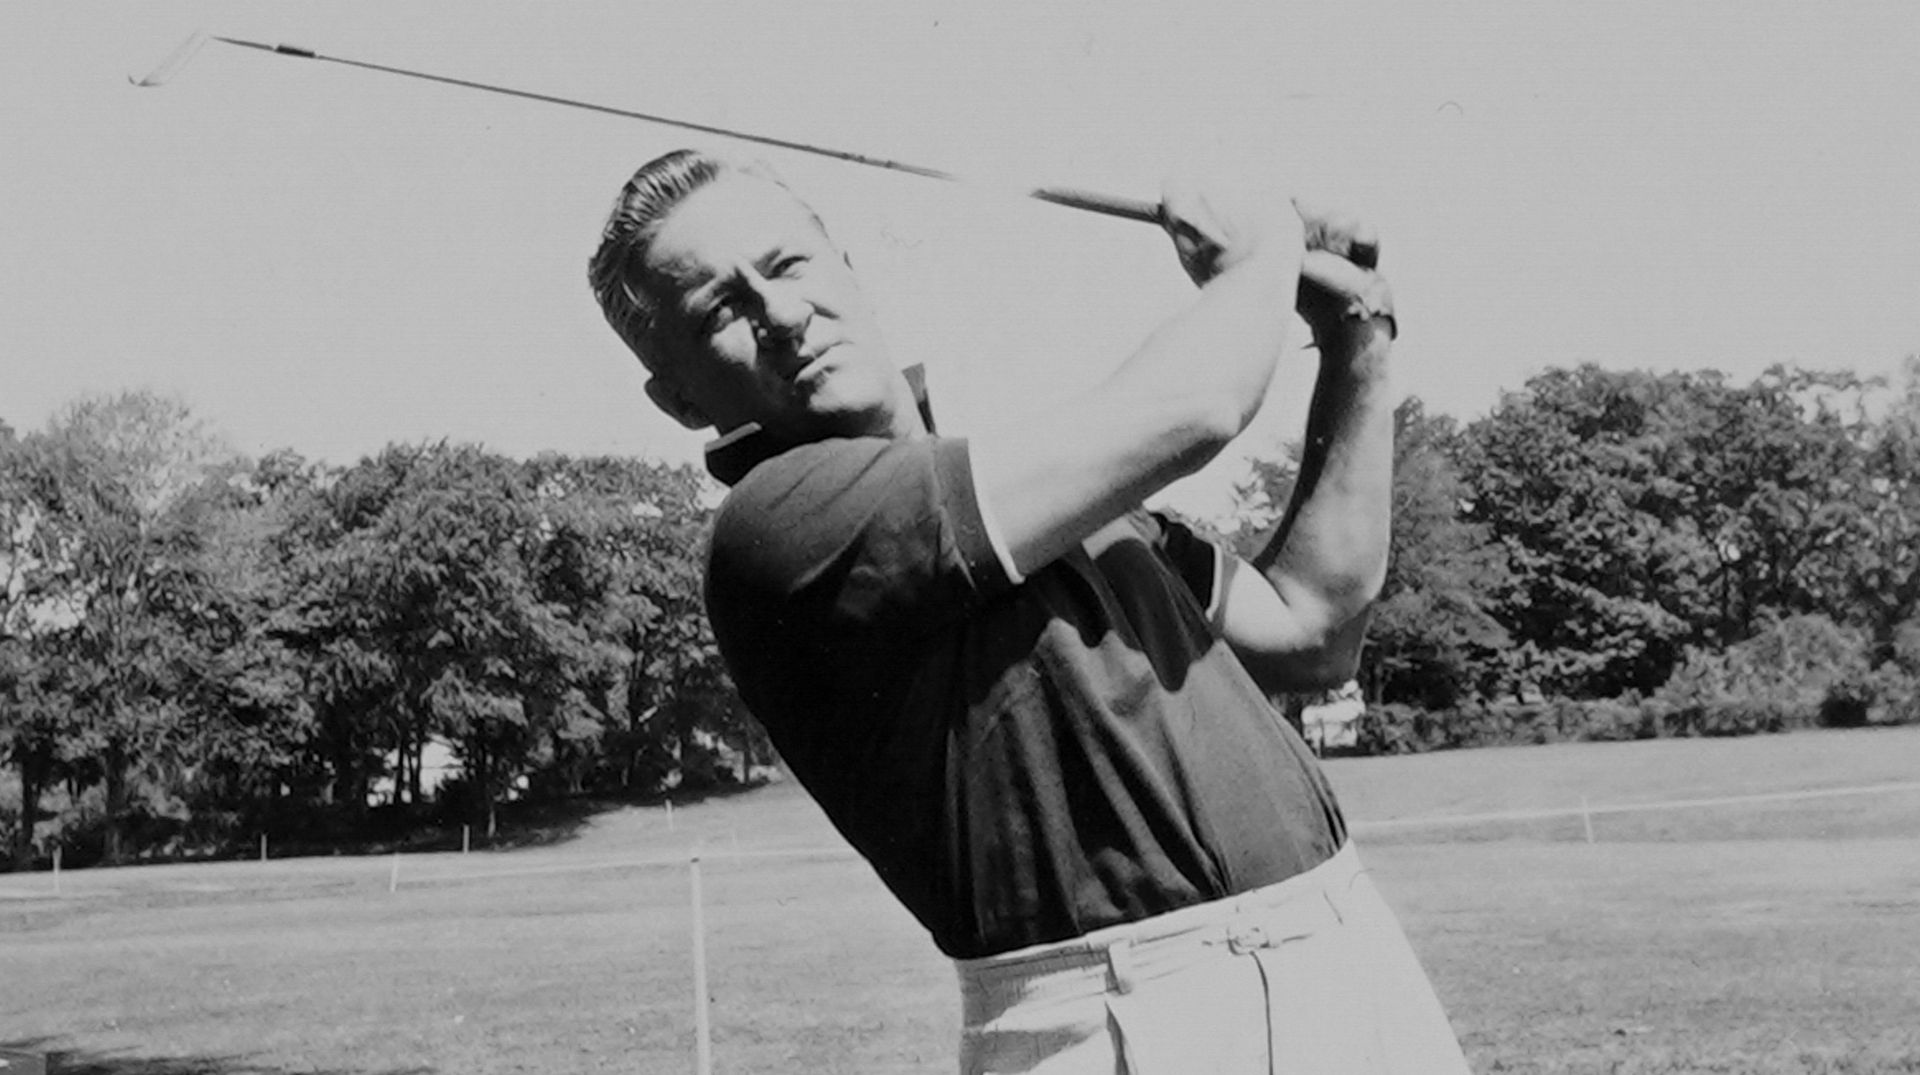 <p>                     Tommy Bolt was known for two things. Number one, and it’s often what we think of first when the American’s name is mentioned, is his temper; he had a reputation for throwing tantrums – and golf clubs. The second was his sweet swing, which helped him to win 15 times on the PGA Tour from 1950 to 1965, which wasn’t bad considering he was usually coming up against Sam Snead and Ben Hogan.                   </p>